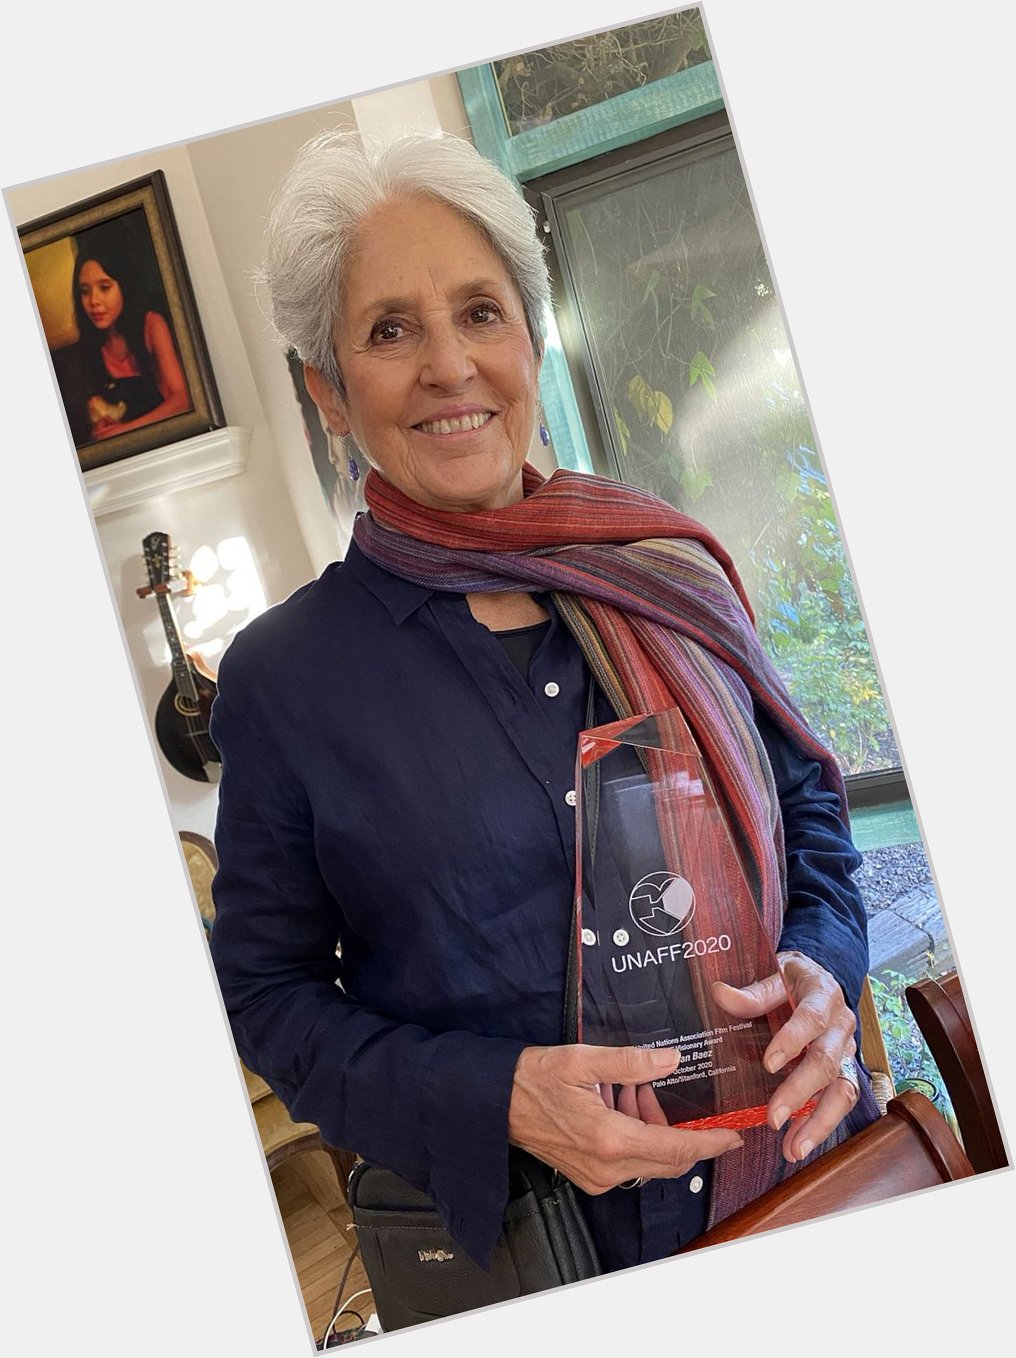 Happy birthday to Joan Baez, the newest member of the UNAFF Honorary Committee! 